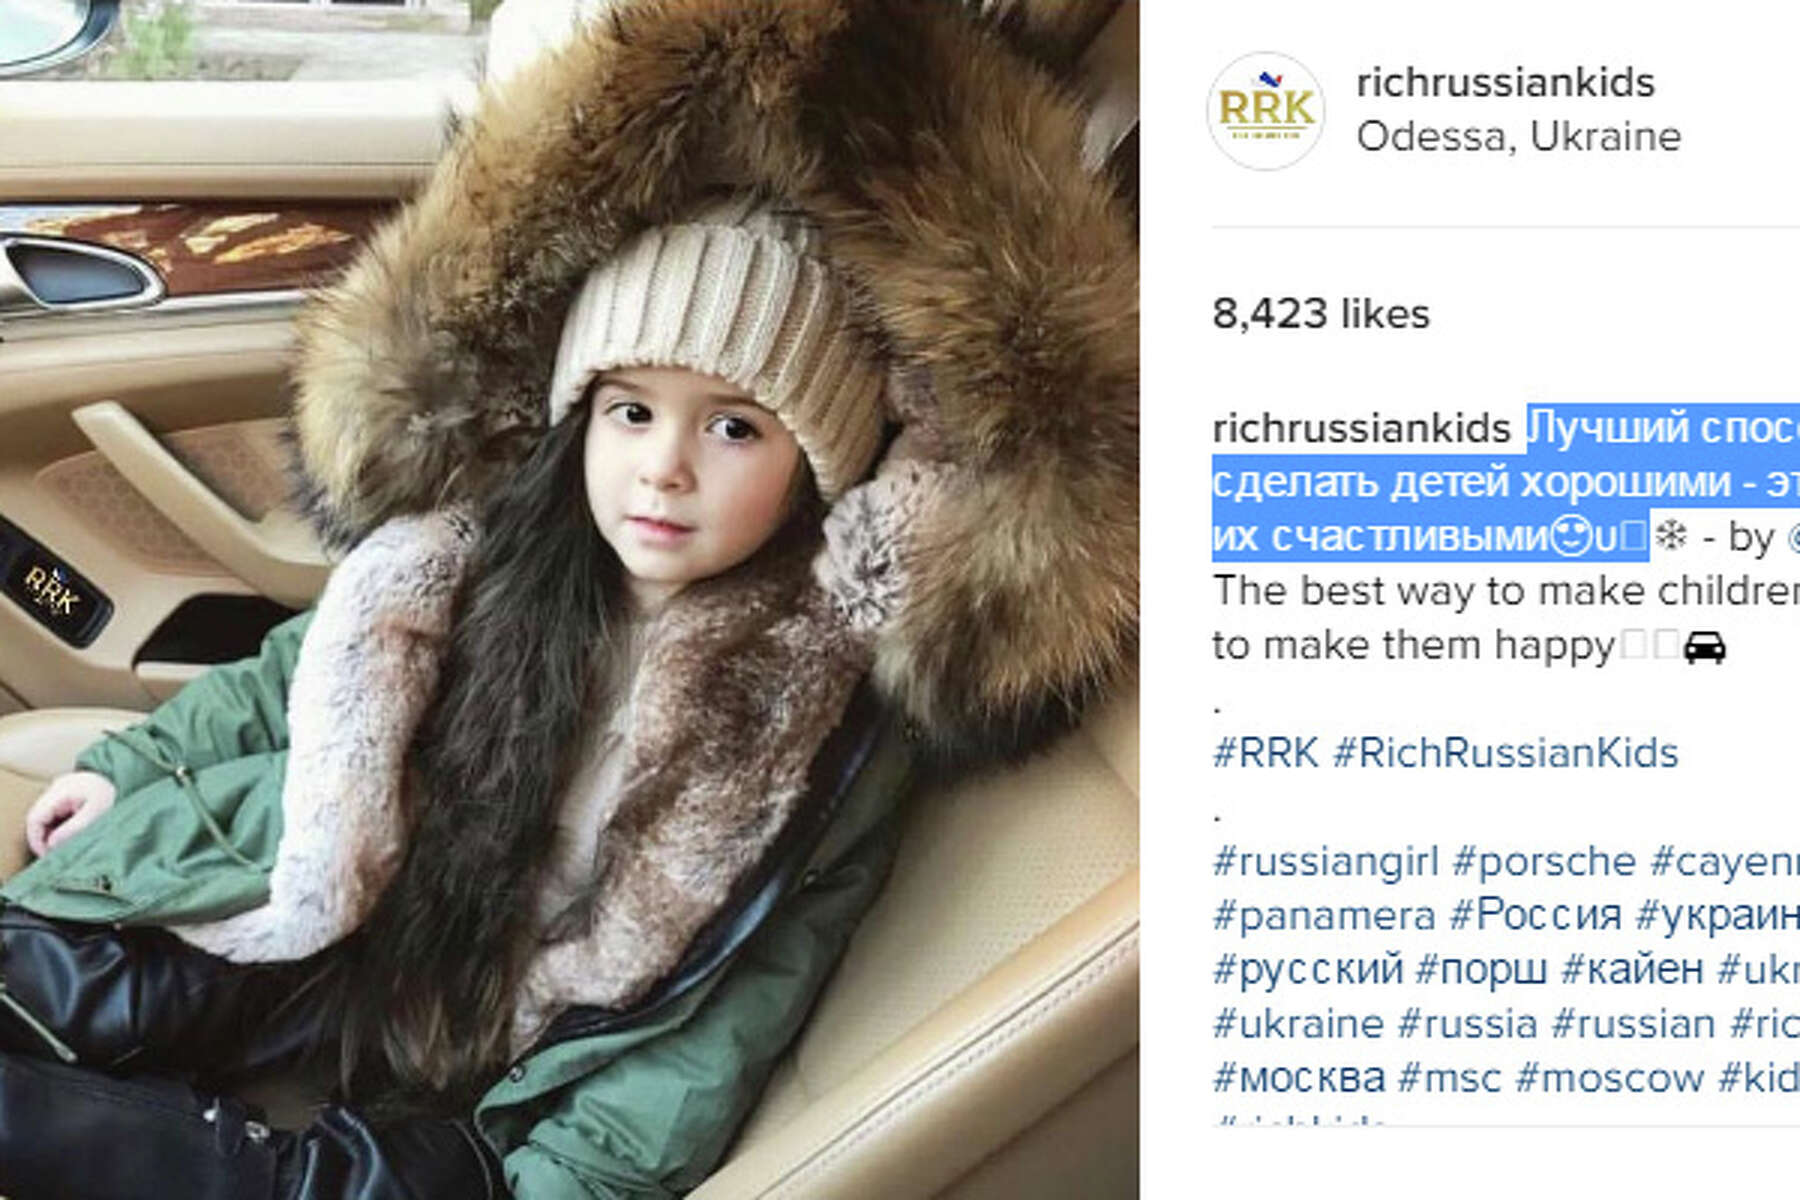 Rich Russian Kids' on Instagram shows wealth of spoiled youngsters